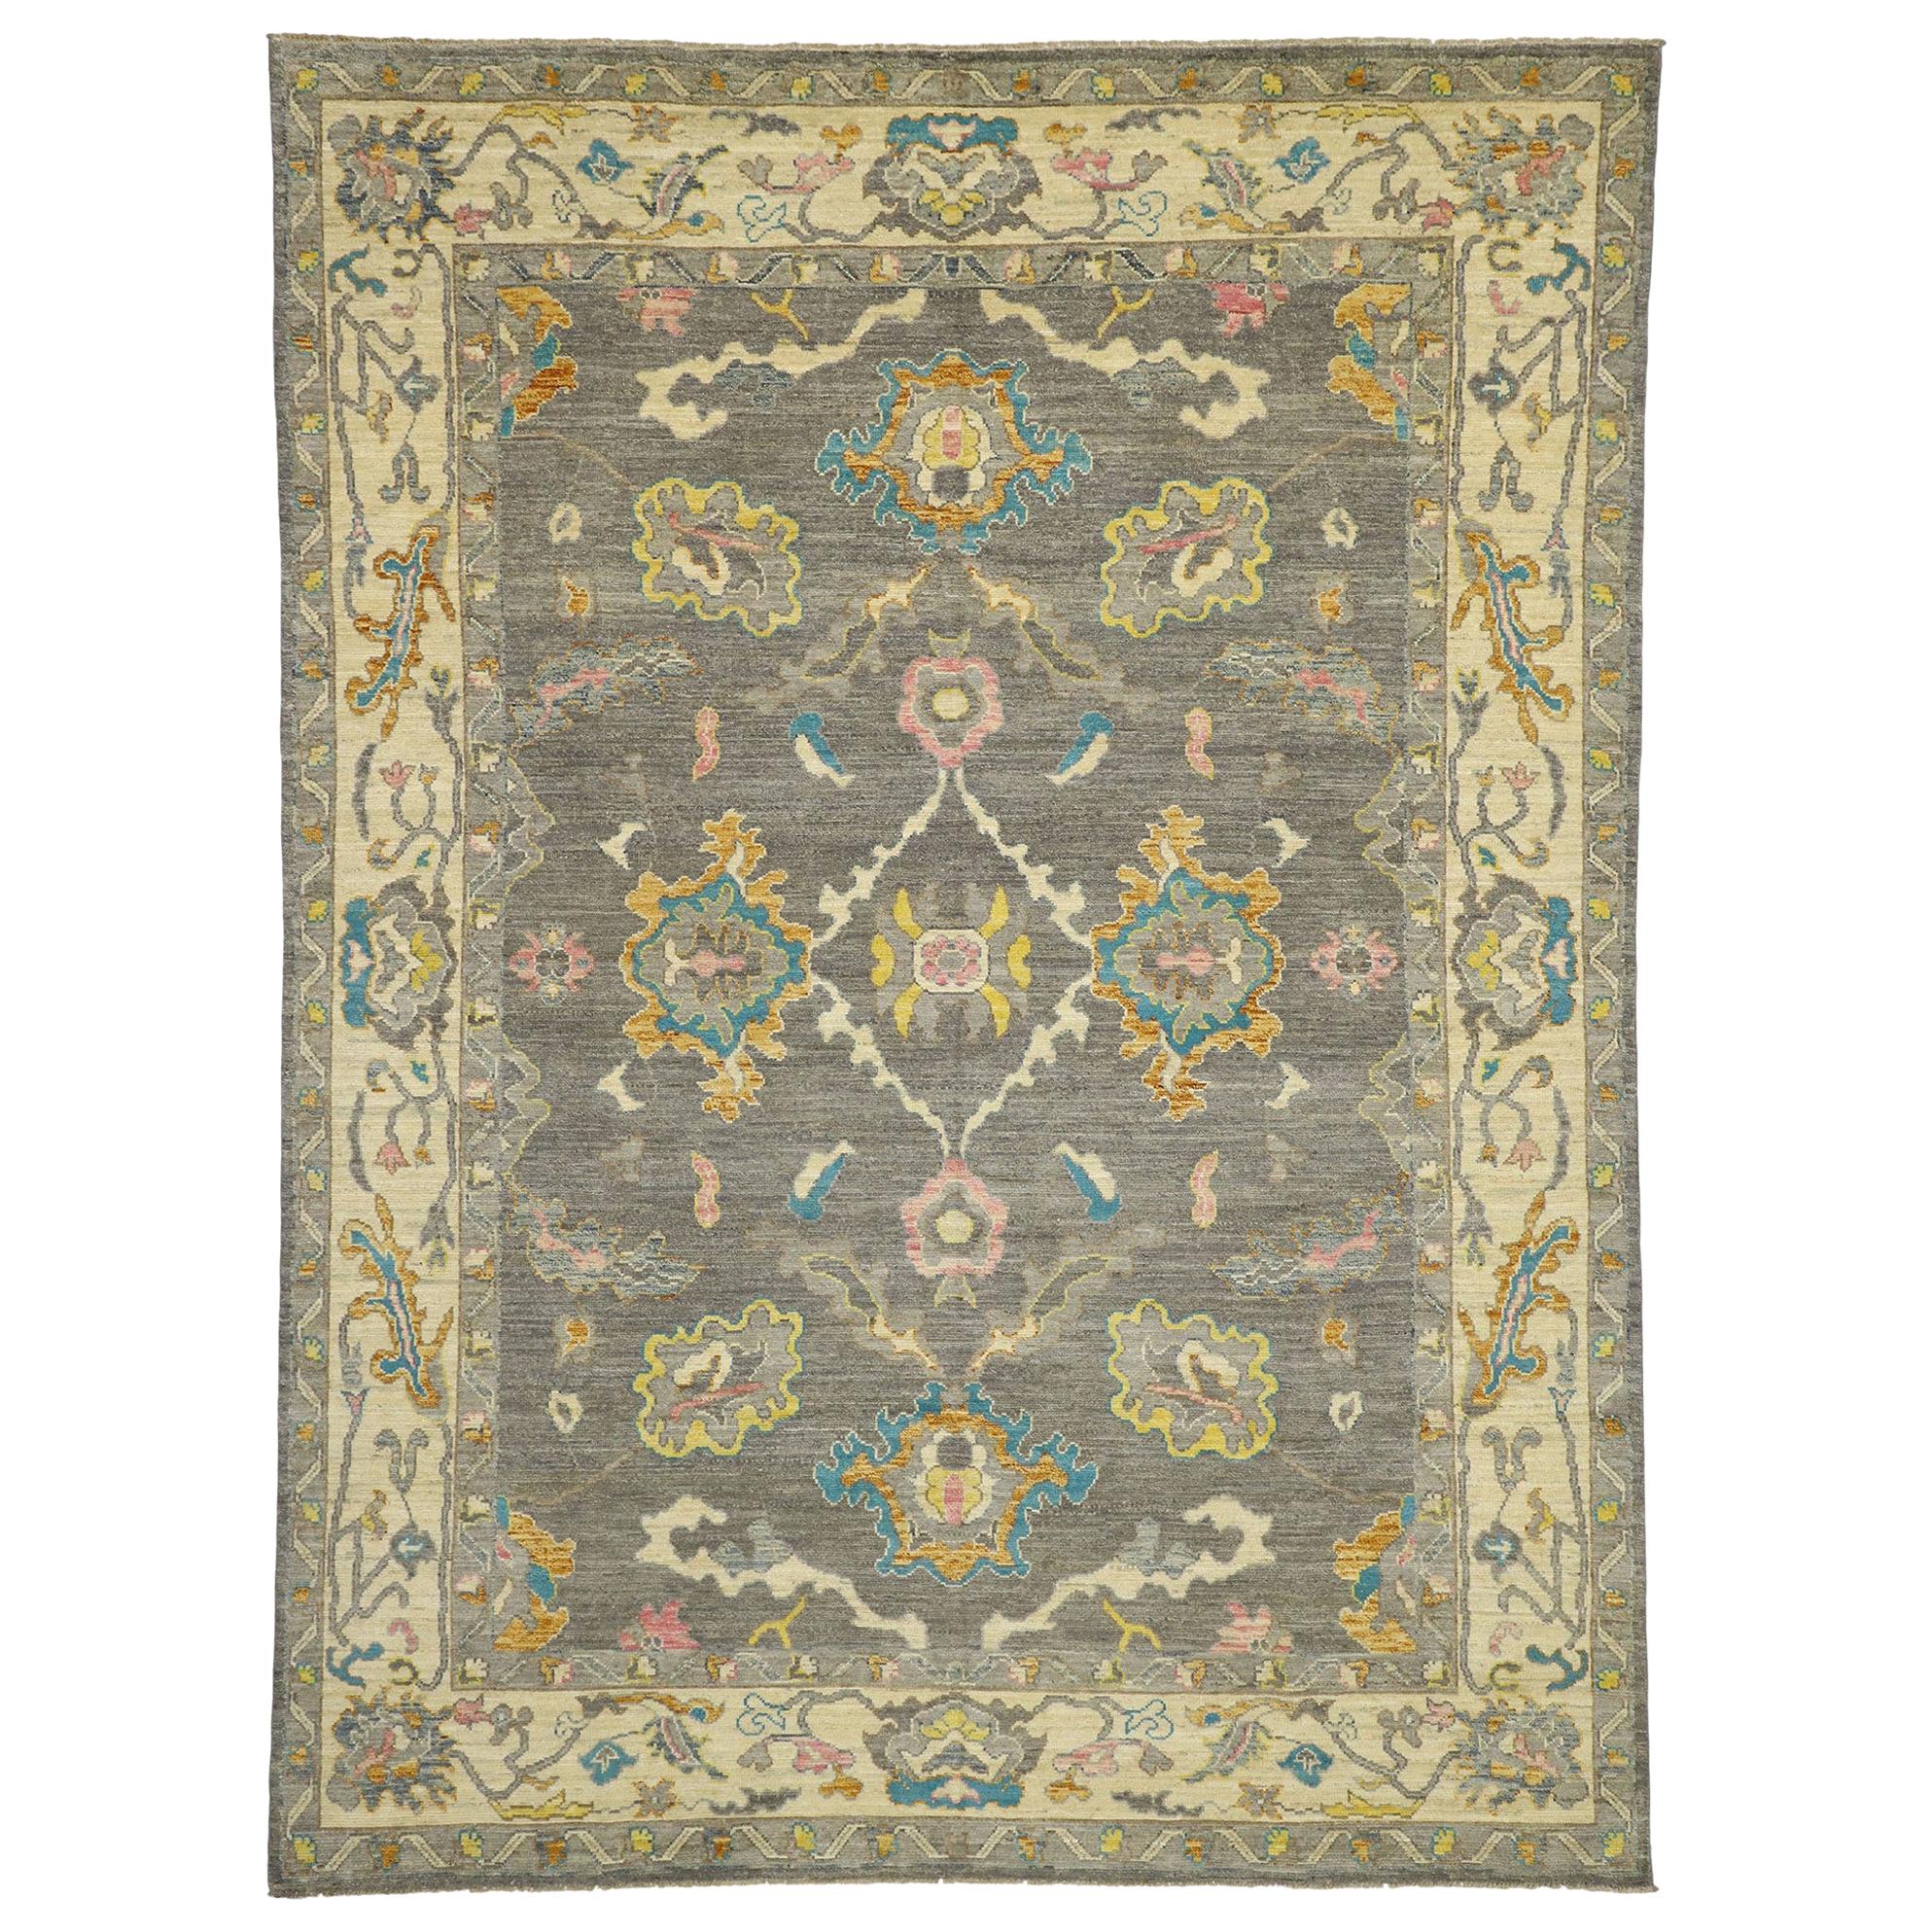 New Contemporary Oushak Rug with Pastel Colors and Transitional Style